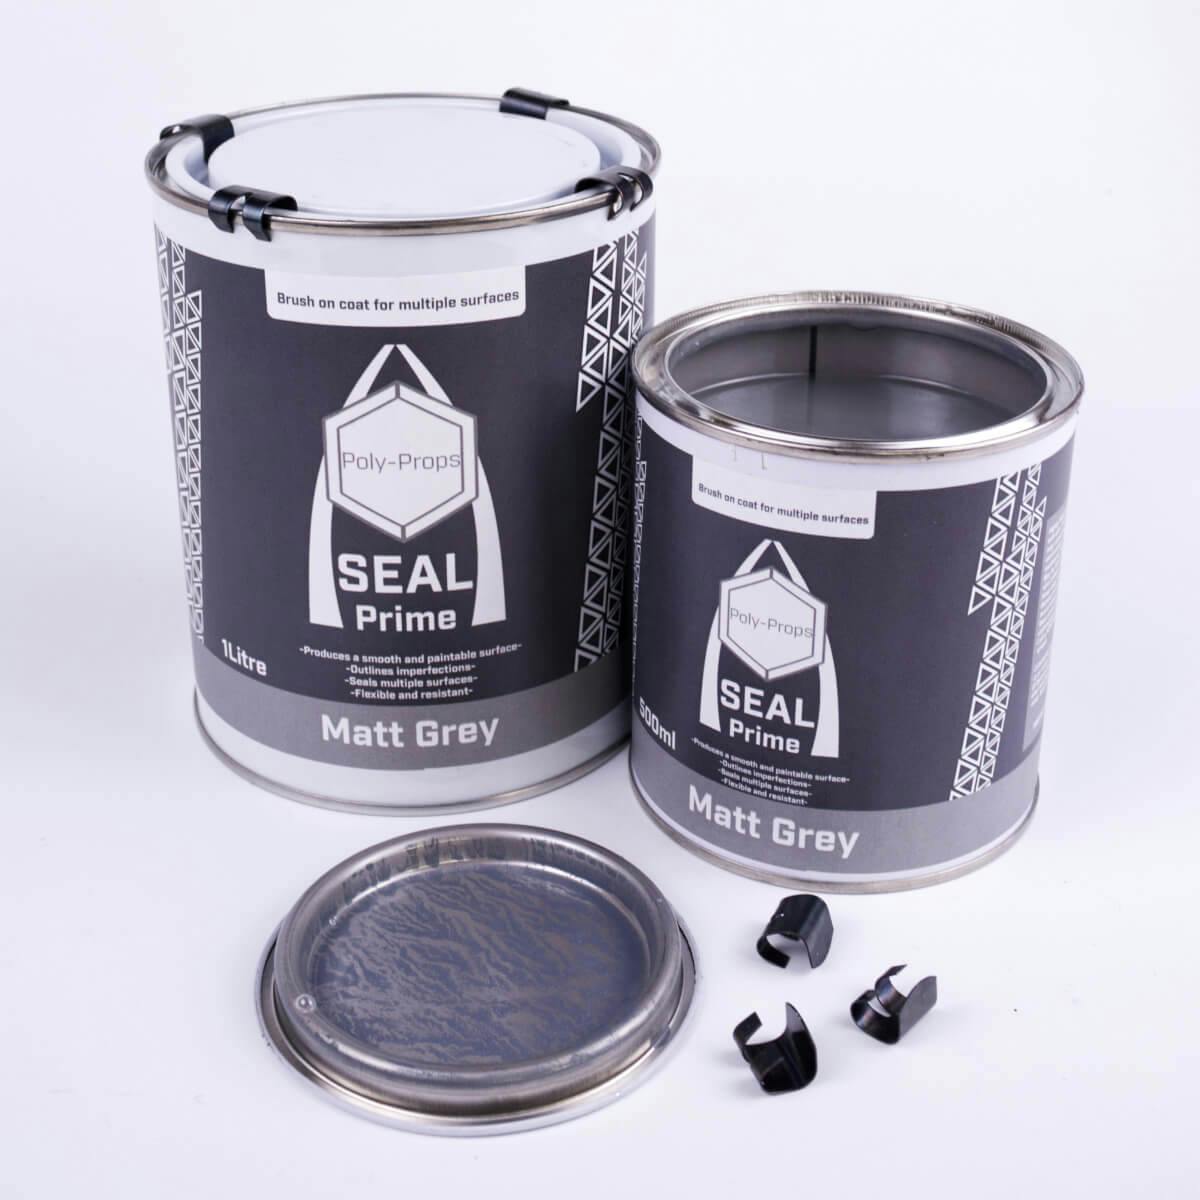 Both sizes of Seal Prime primer with lid off